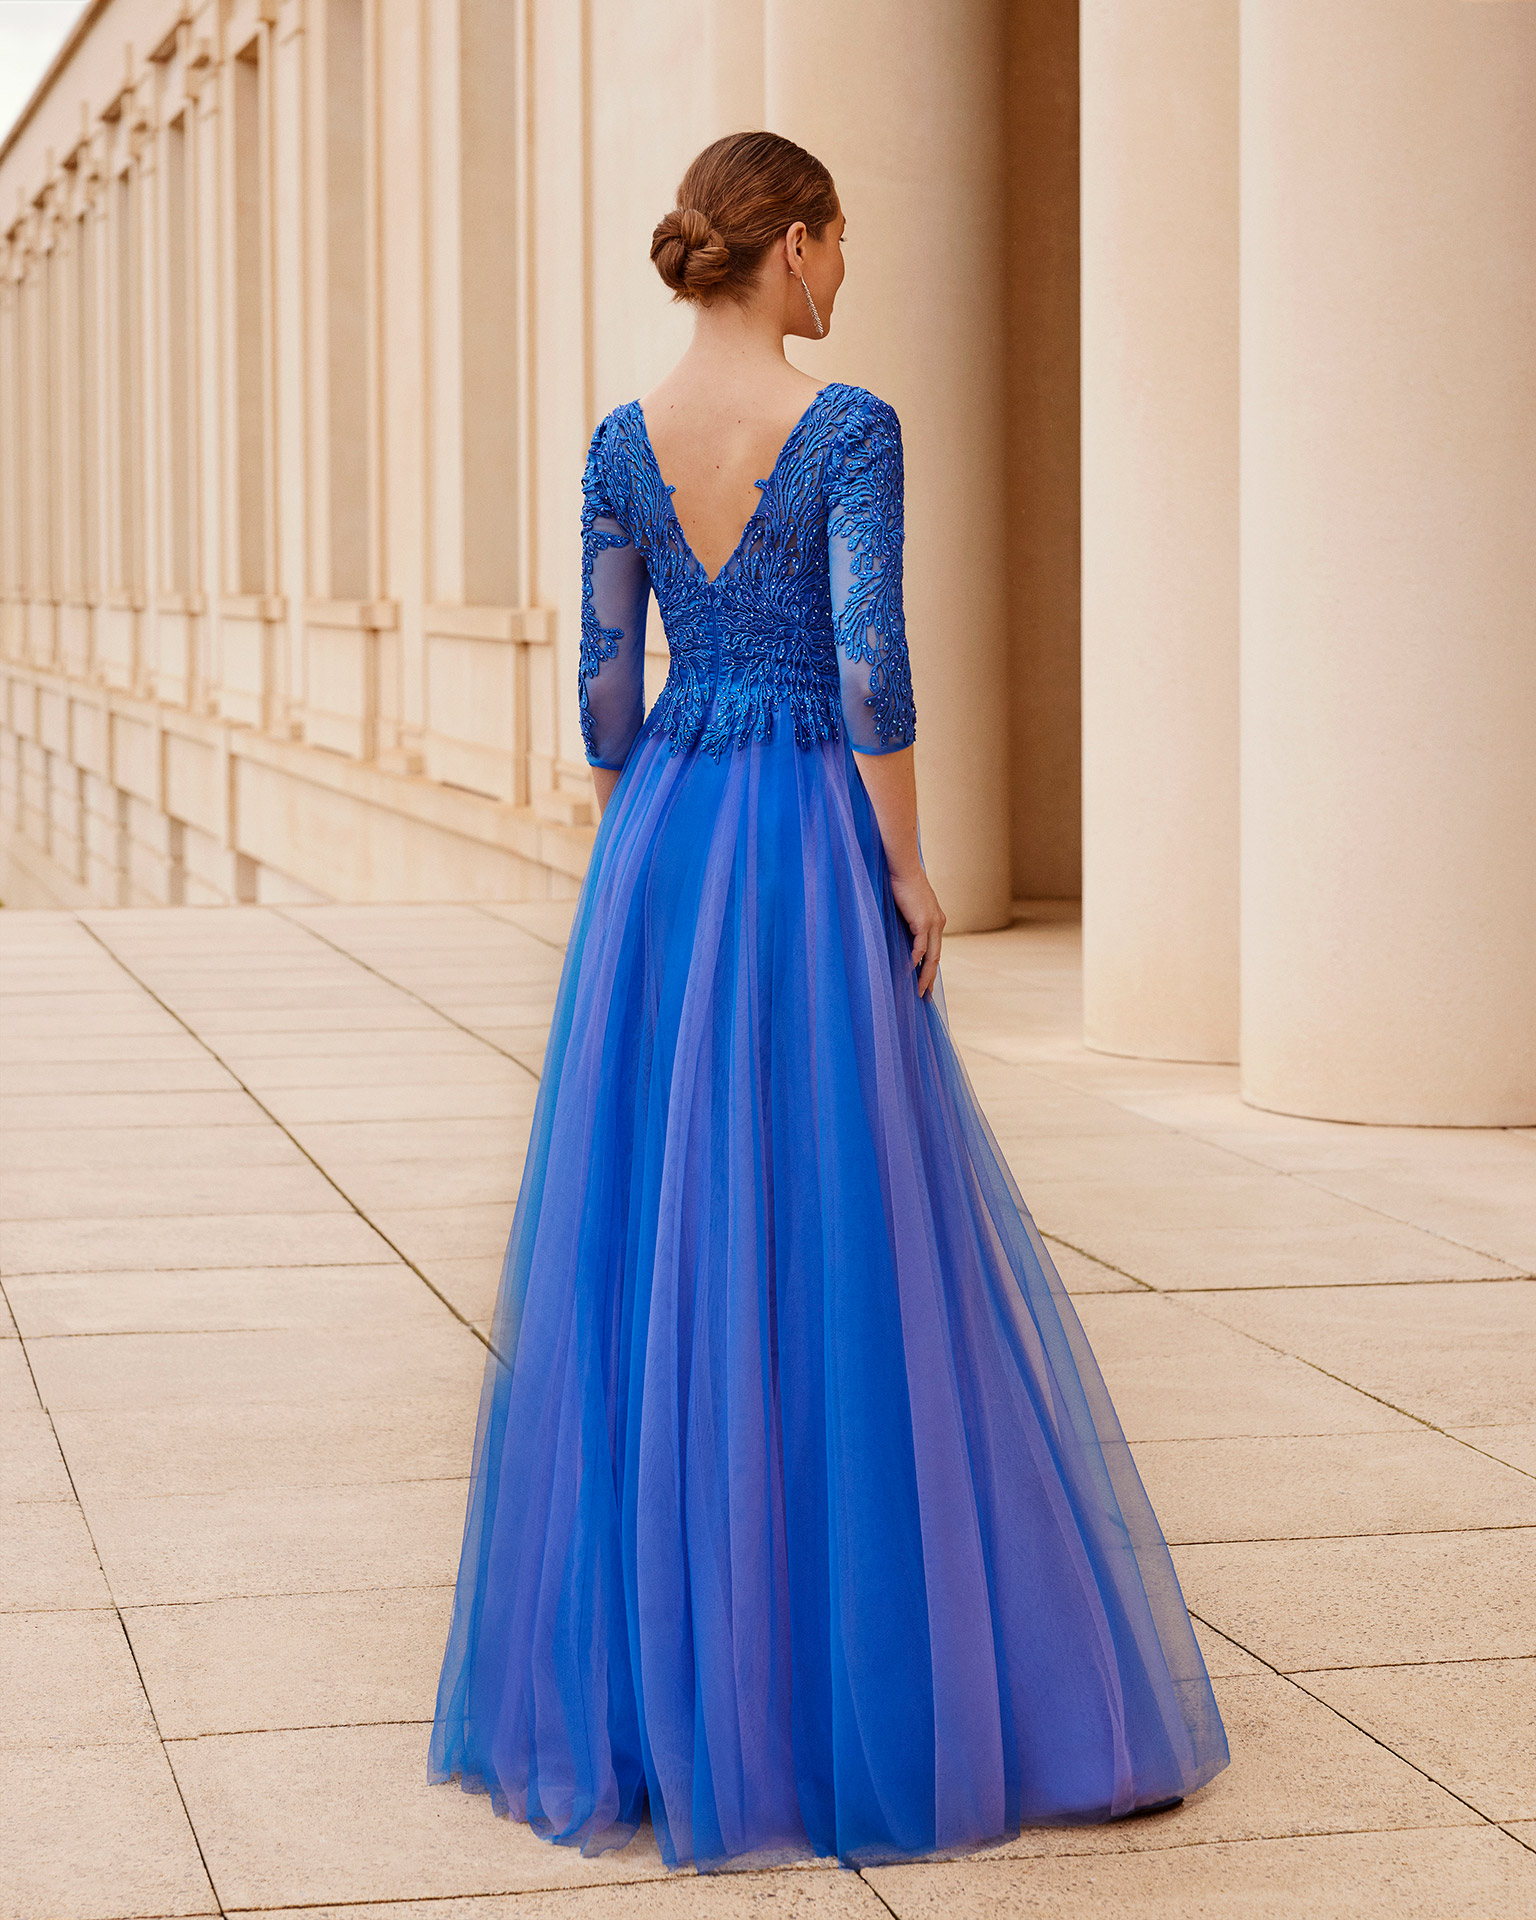 Classic long evening dress, made of tulle and lace with beadwork. Couture Club design, with an illusion neckline, a V-back, and French sleeves. MARFIL_BARCELONA.